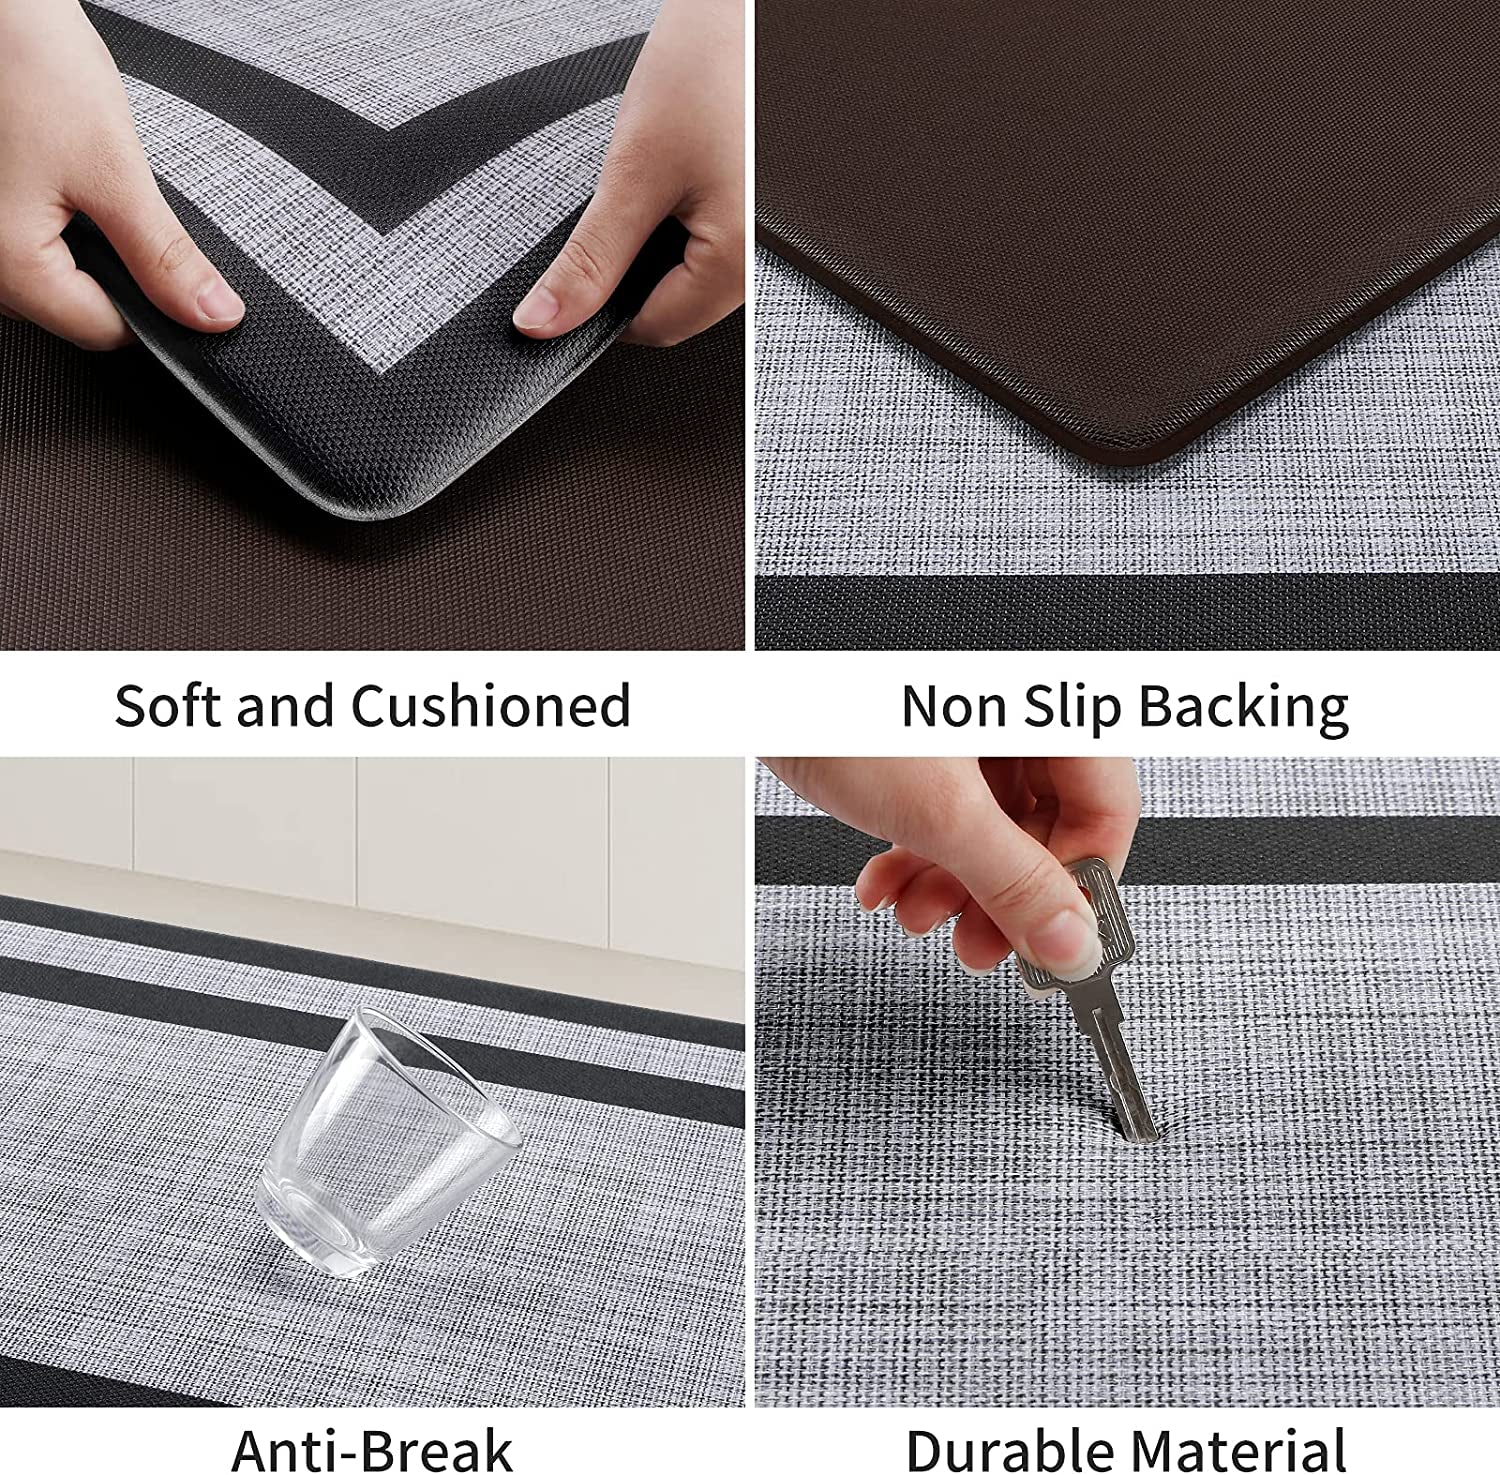 Kitchen Mat [2 PCS] Cushioned Anti-Fatigue Non-Skid Waterproof Rugs Ergonomic Comfort Standing Mat for Kitchen, Floor, Office, Sink, Laundry, Black and Gray